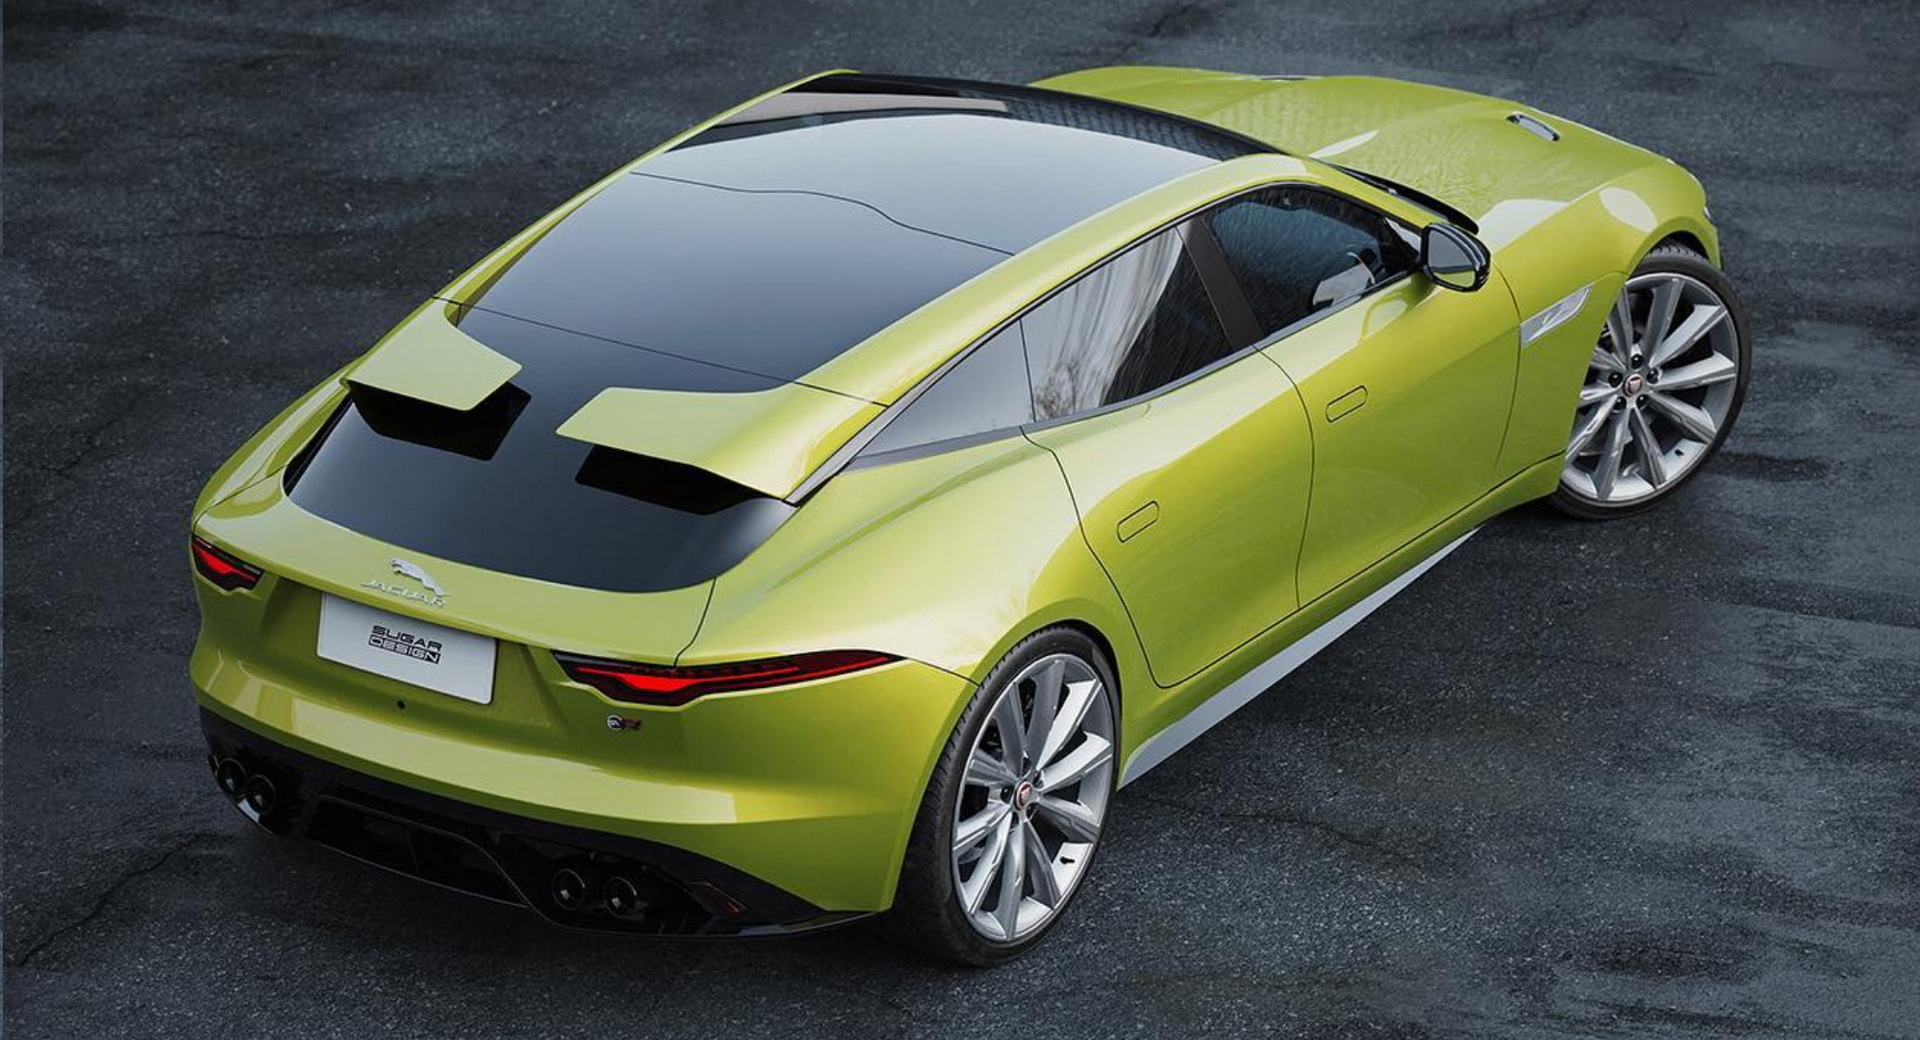 Unofficial Jaguar F-Type Four-Door Coupe Looks… Pretty Good, Actually - CarScoops